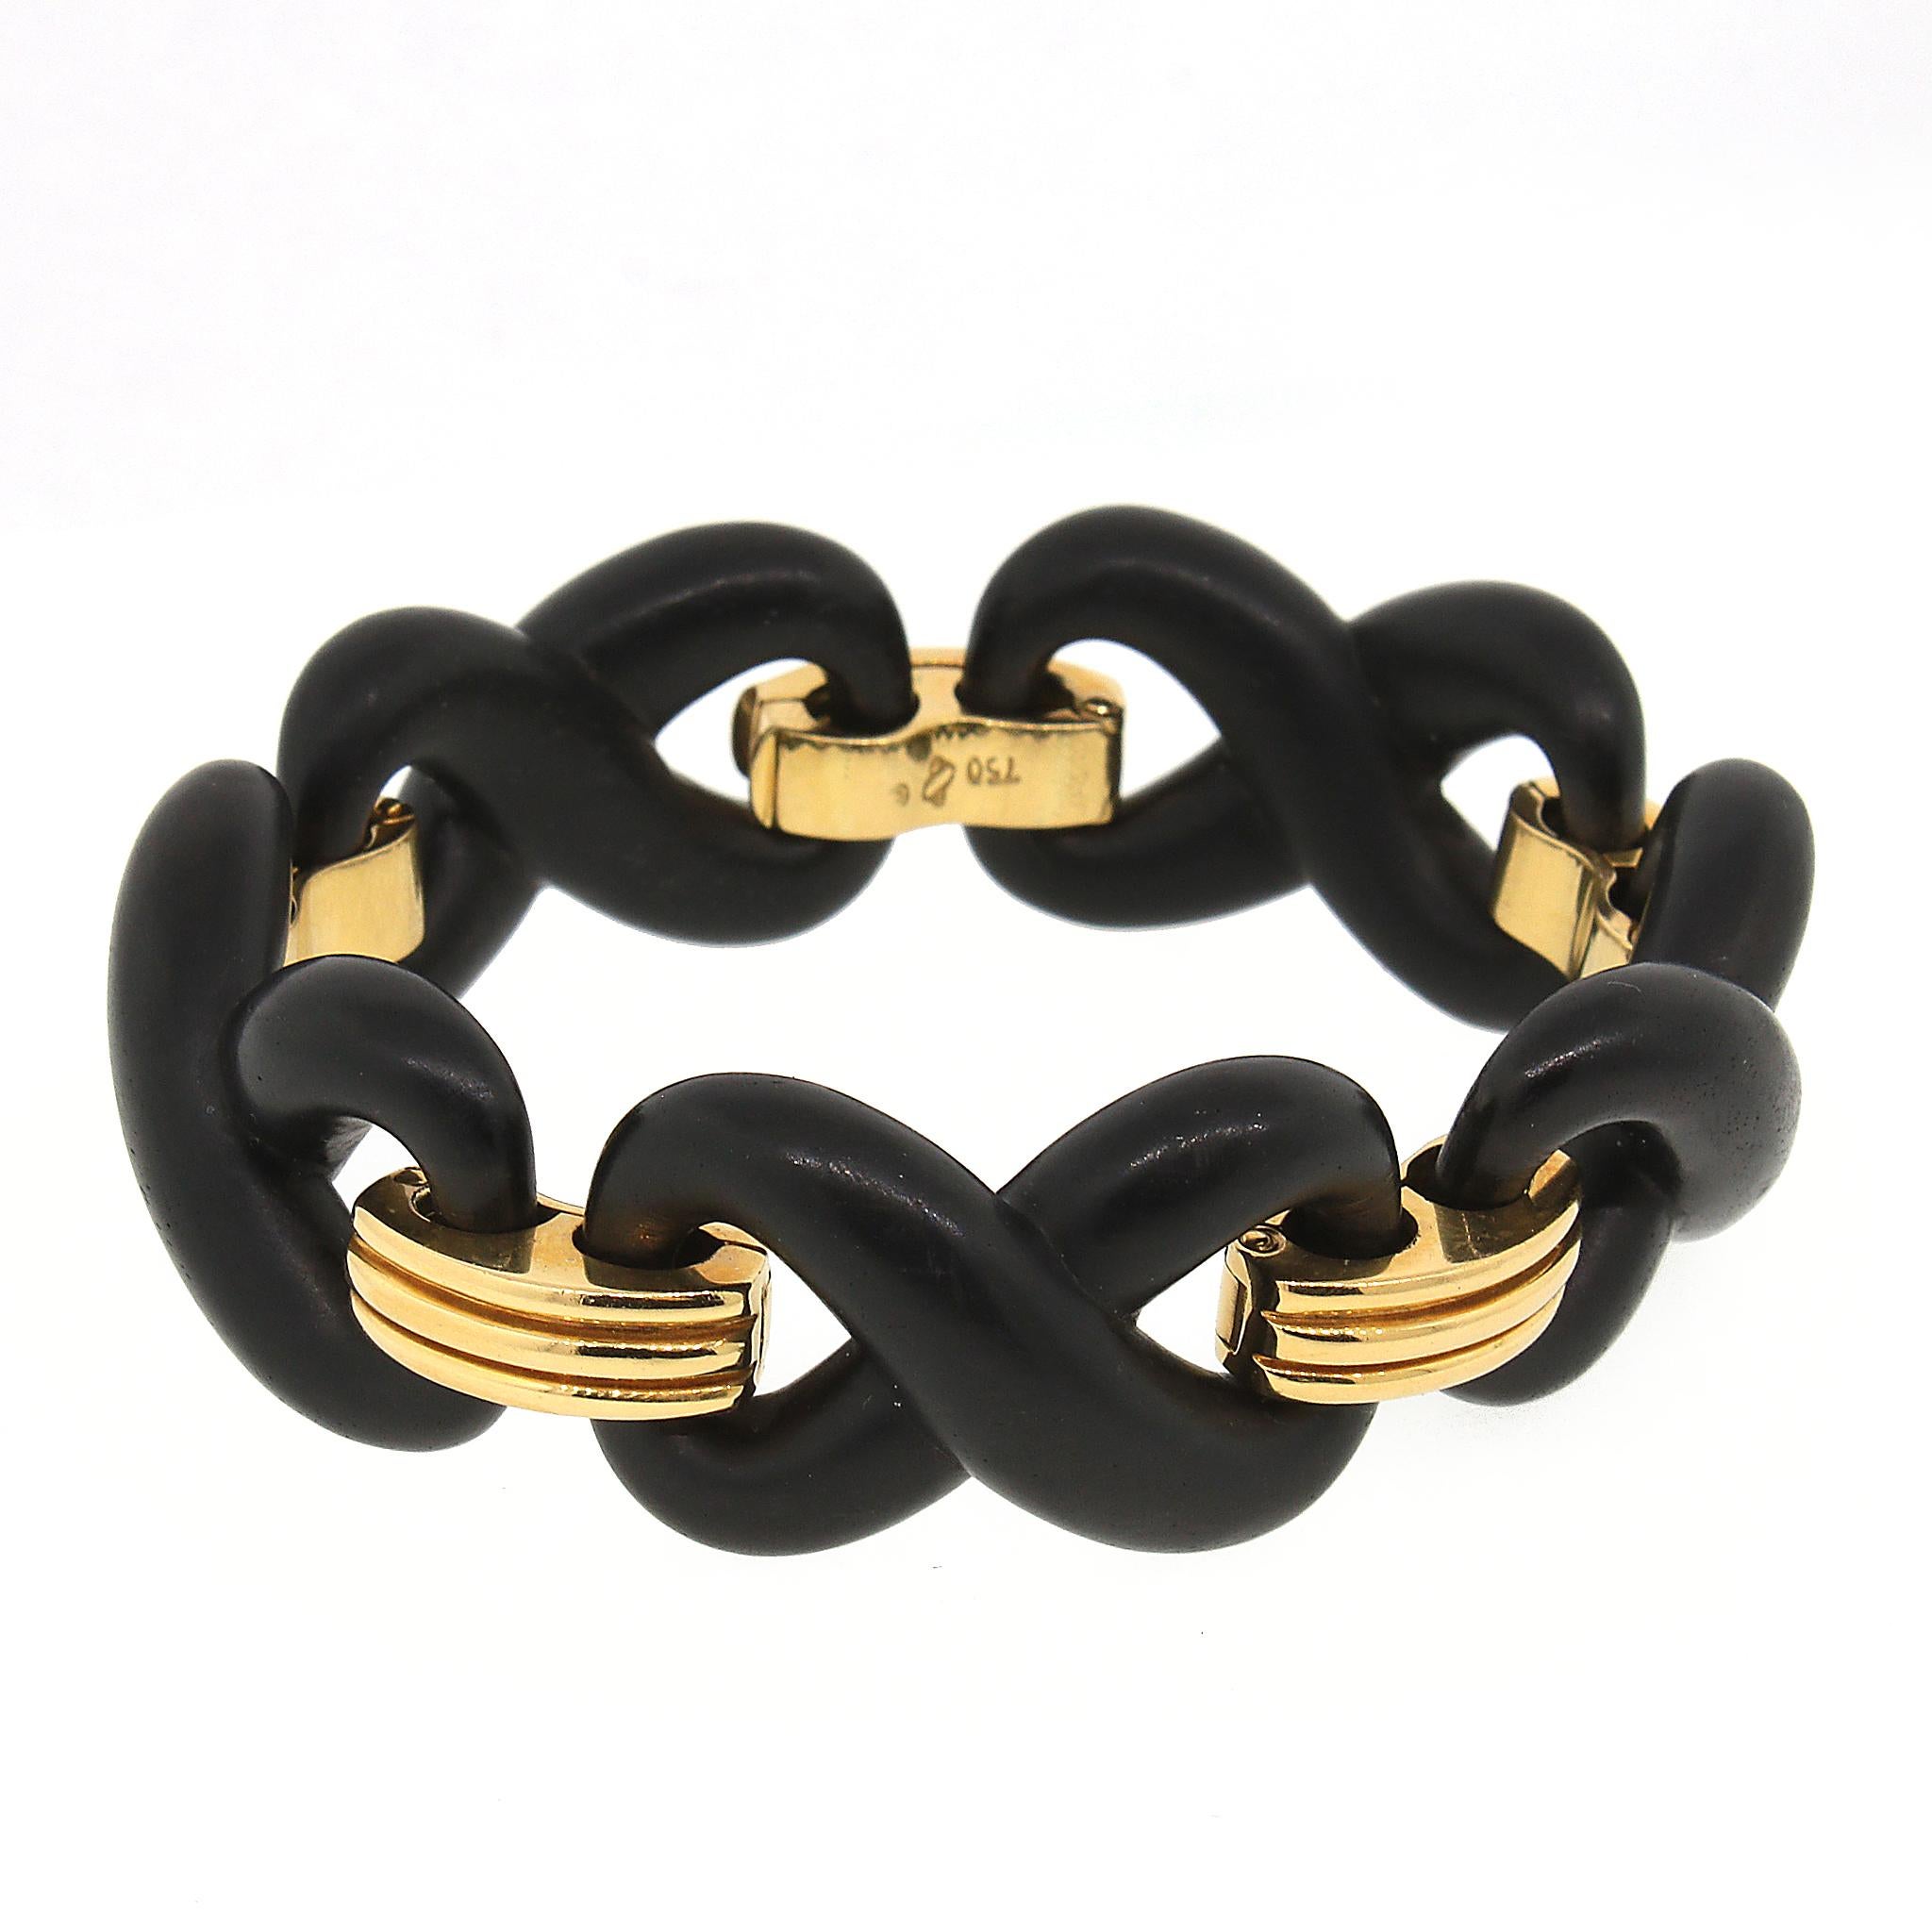 Seaman Schepps Ebony Wood and 18 Kt Yellow Gold Bracelet In Good Condition For Sale In New York, NY